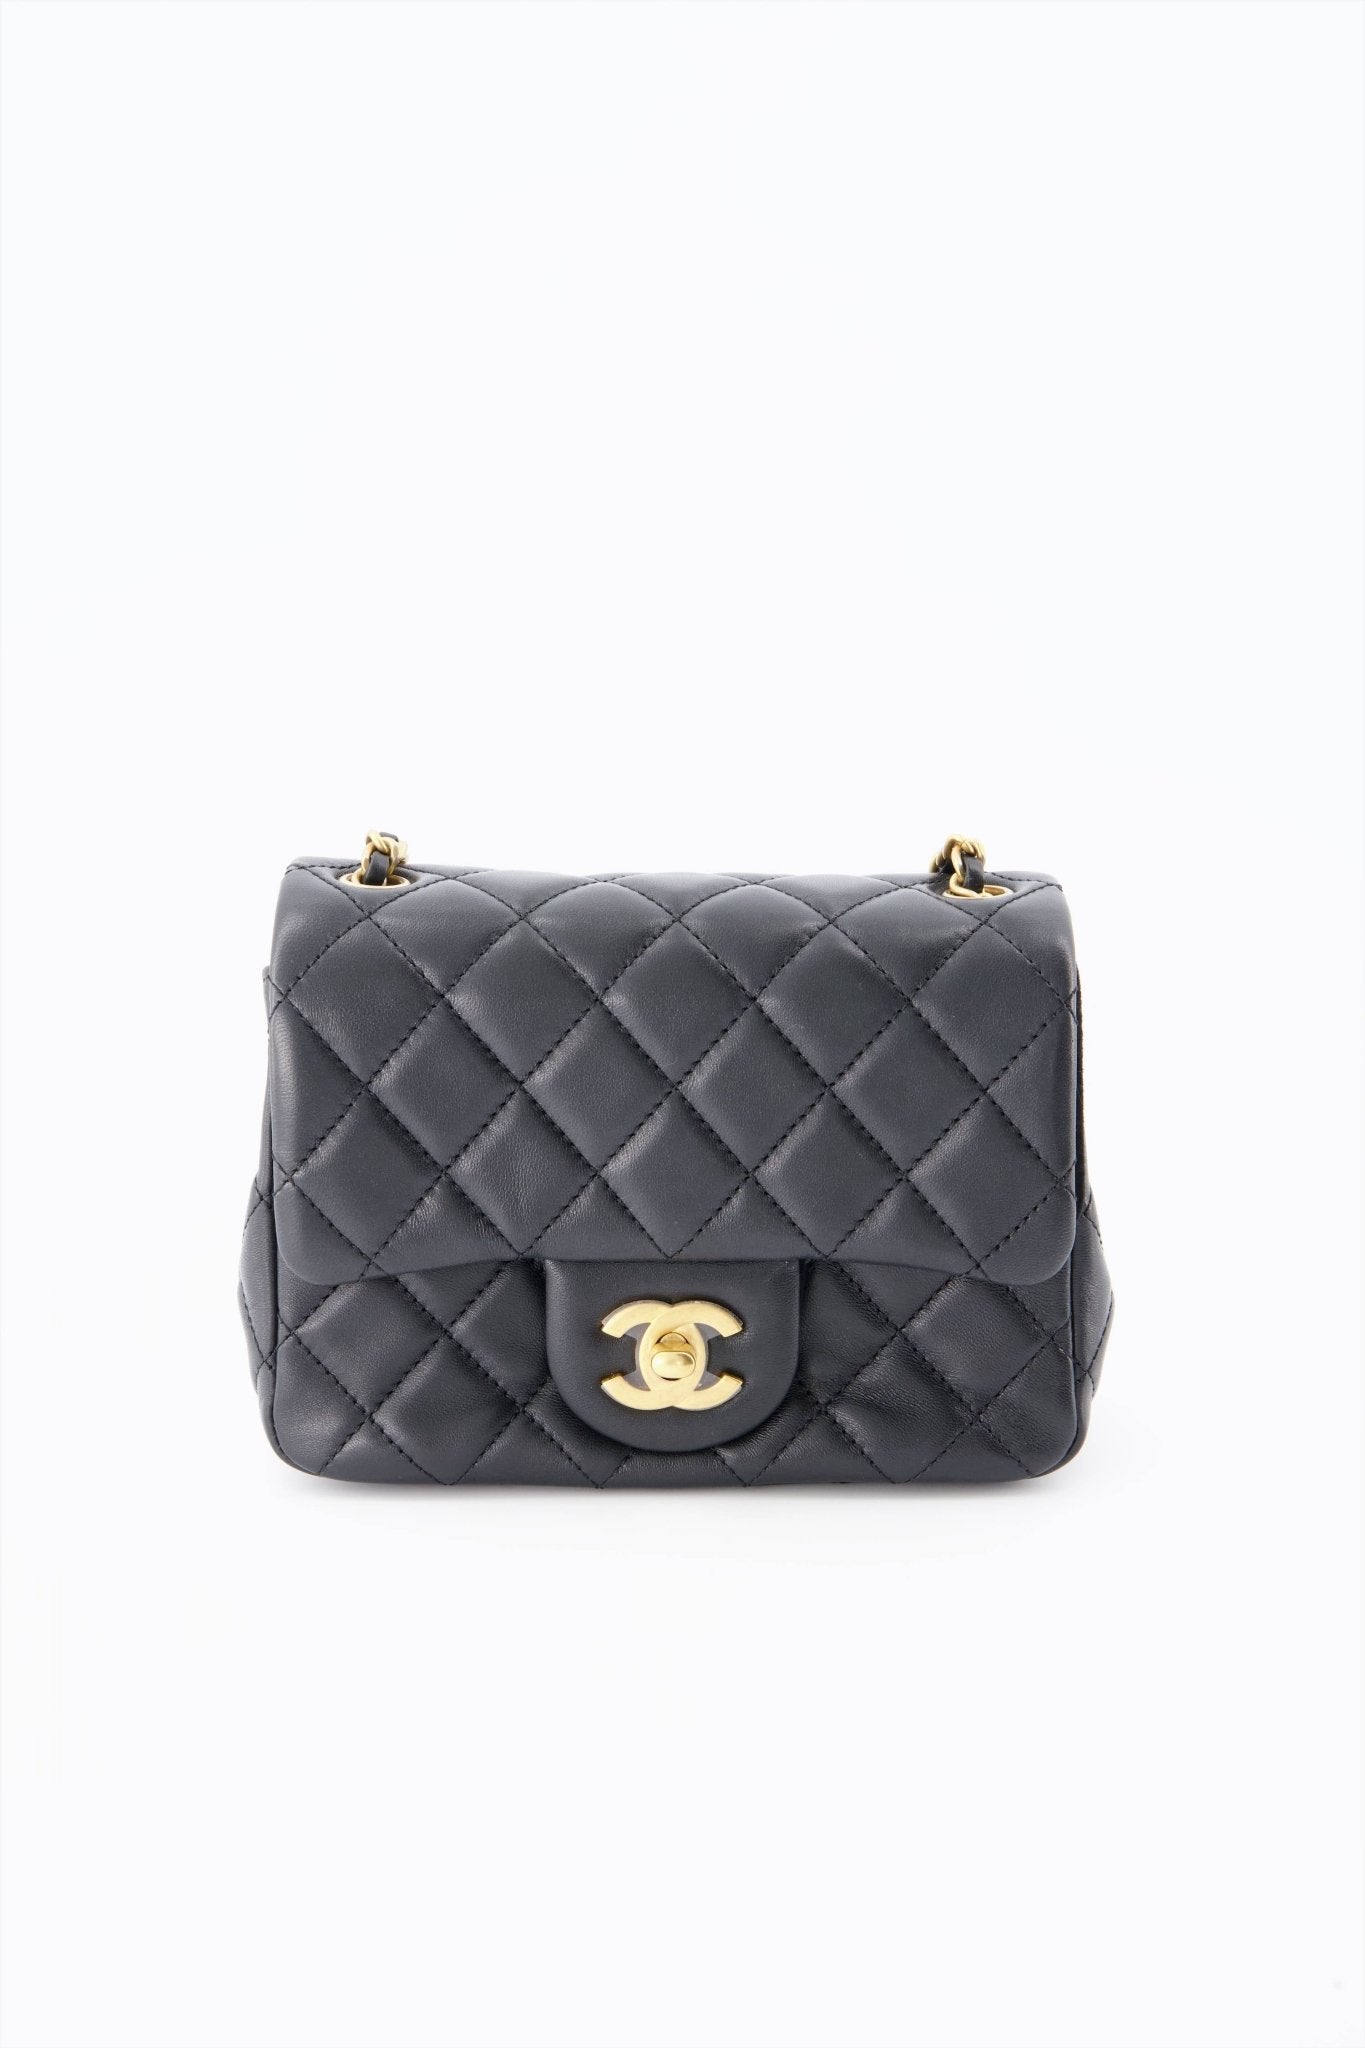 Holy Grail* Chanel Black with Gold Interior Pearl Crush Mini ...